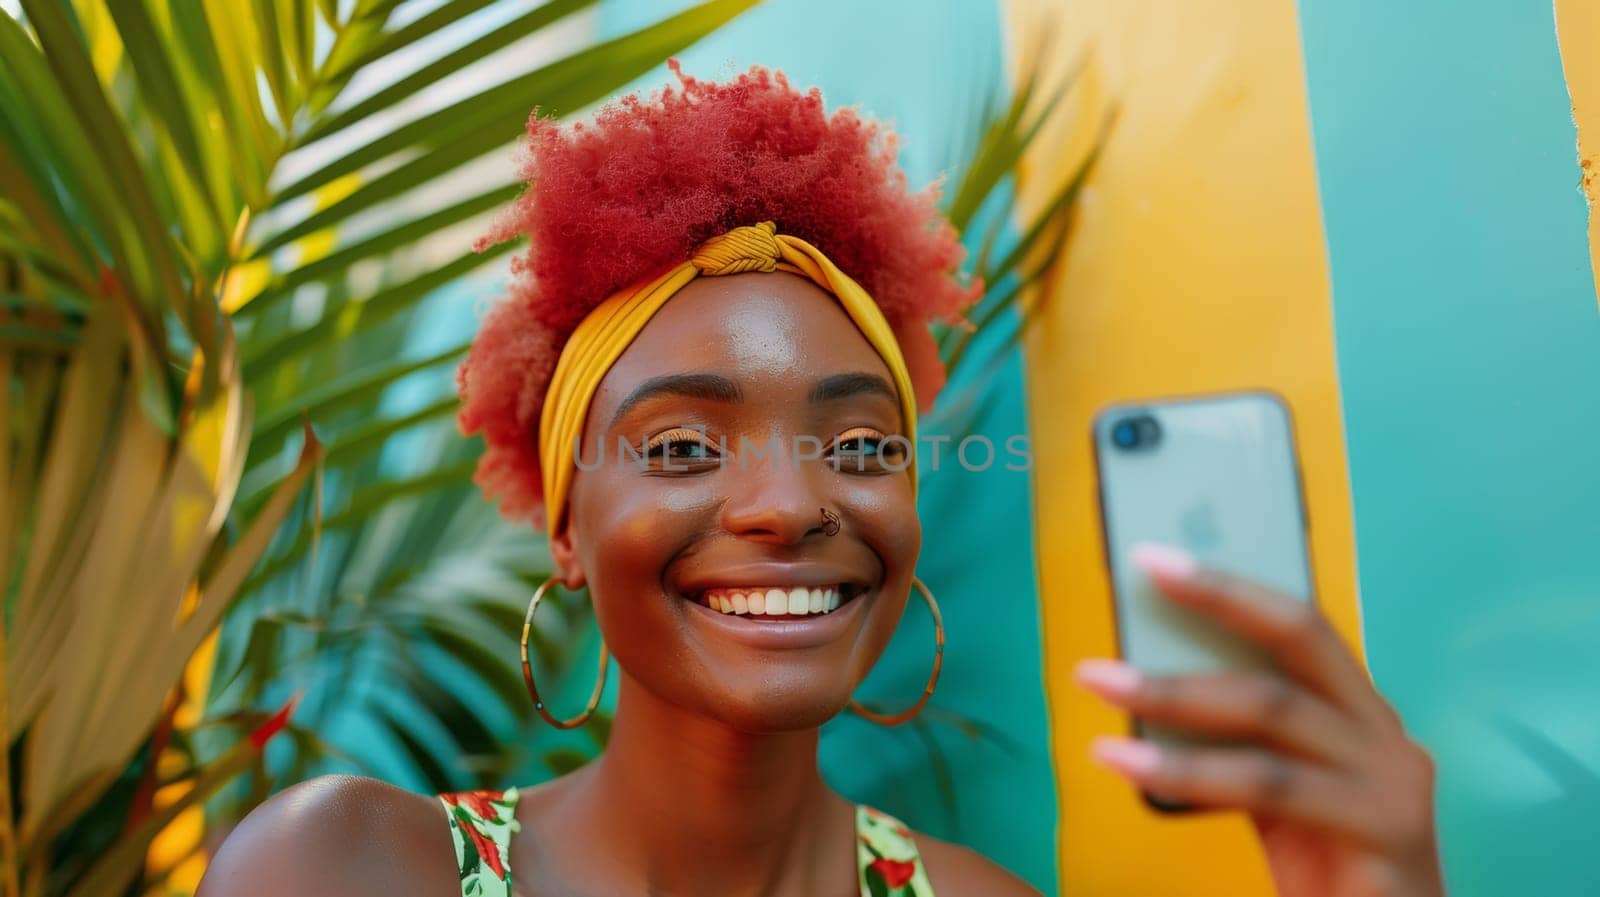 A woman with a red afro holding up her cell phone